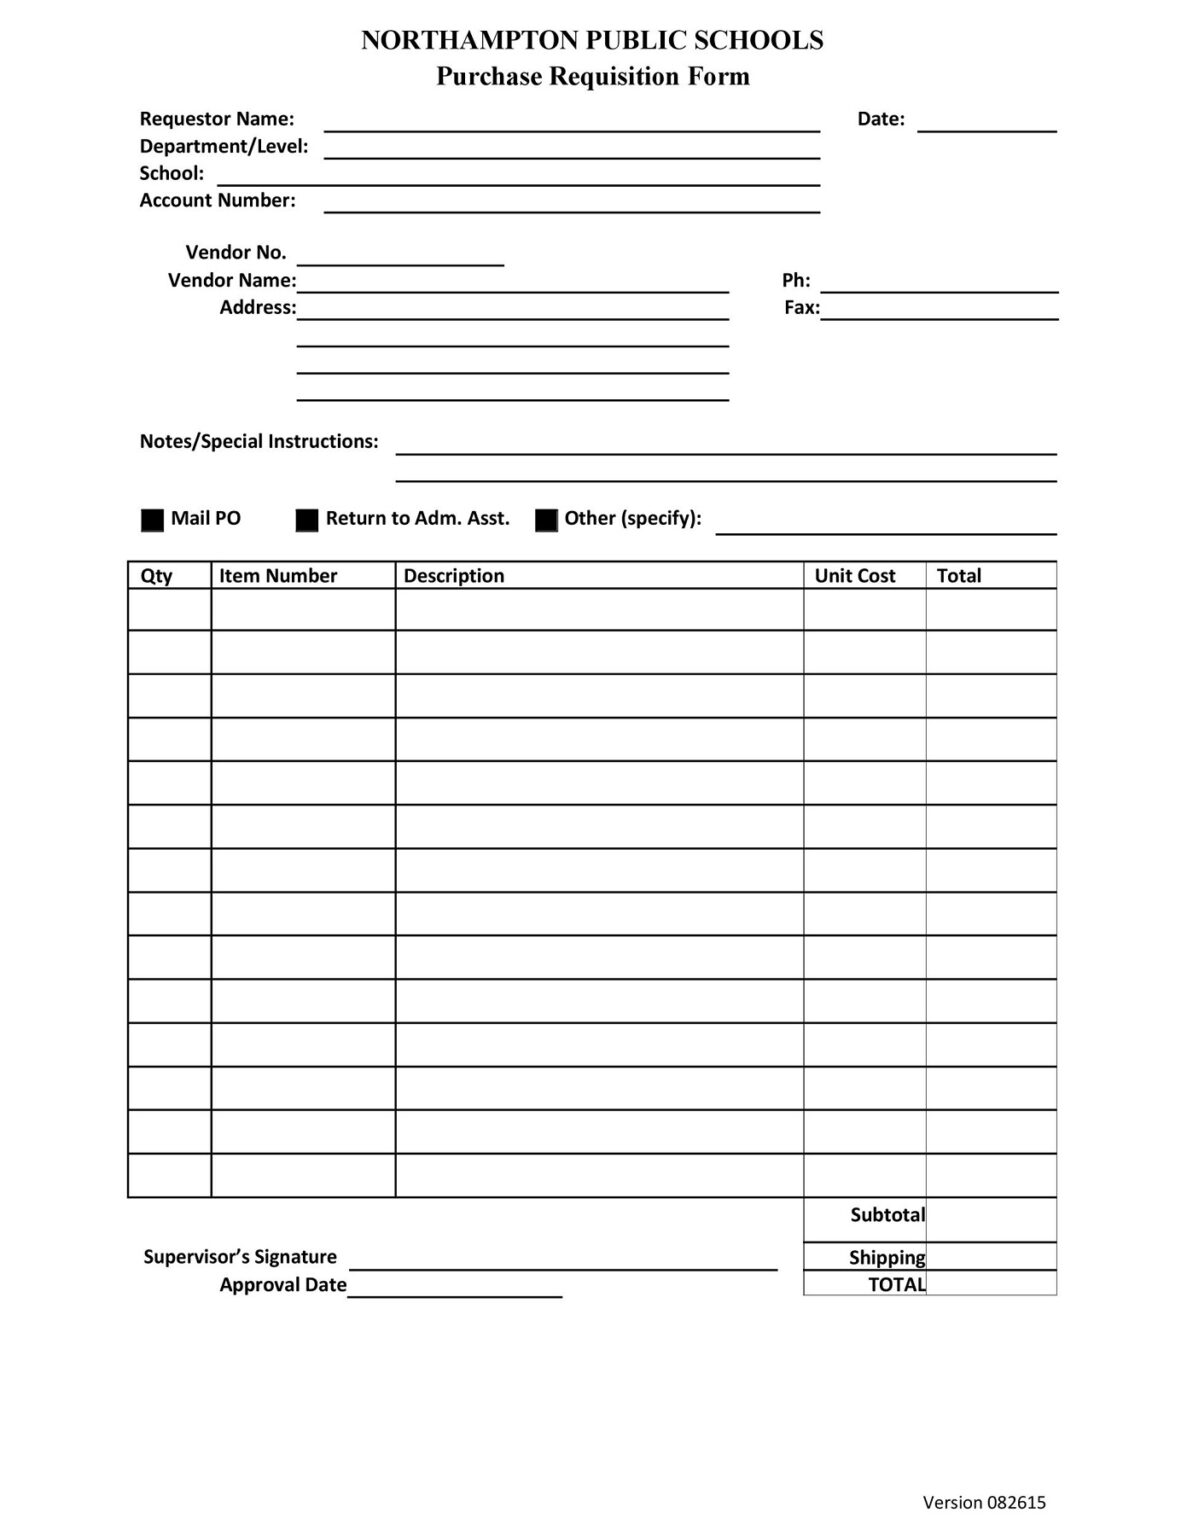 55-powerful-requisition-form-template-redlinesp